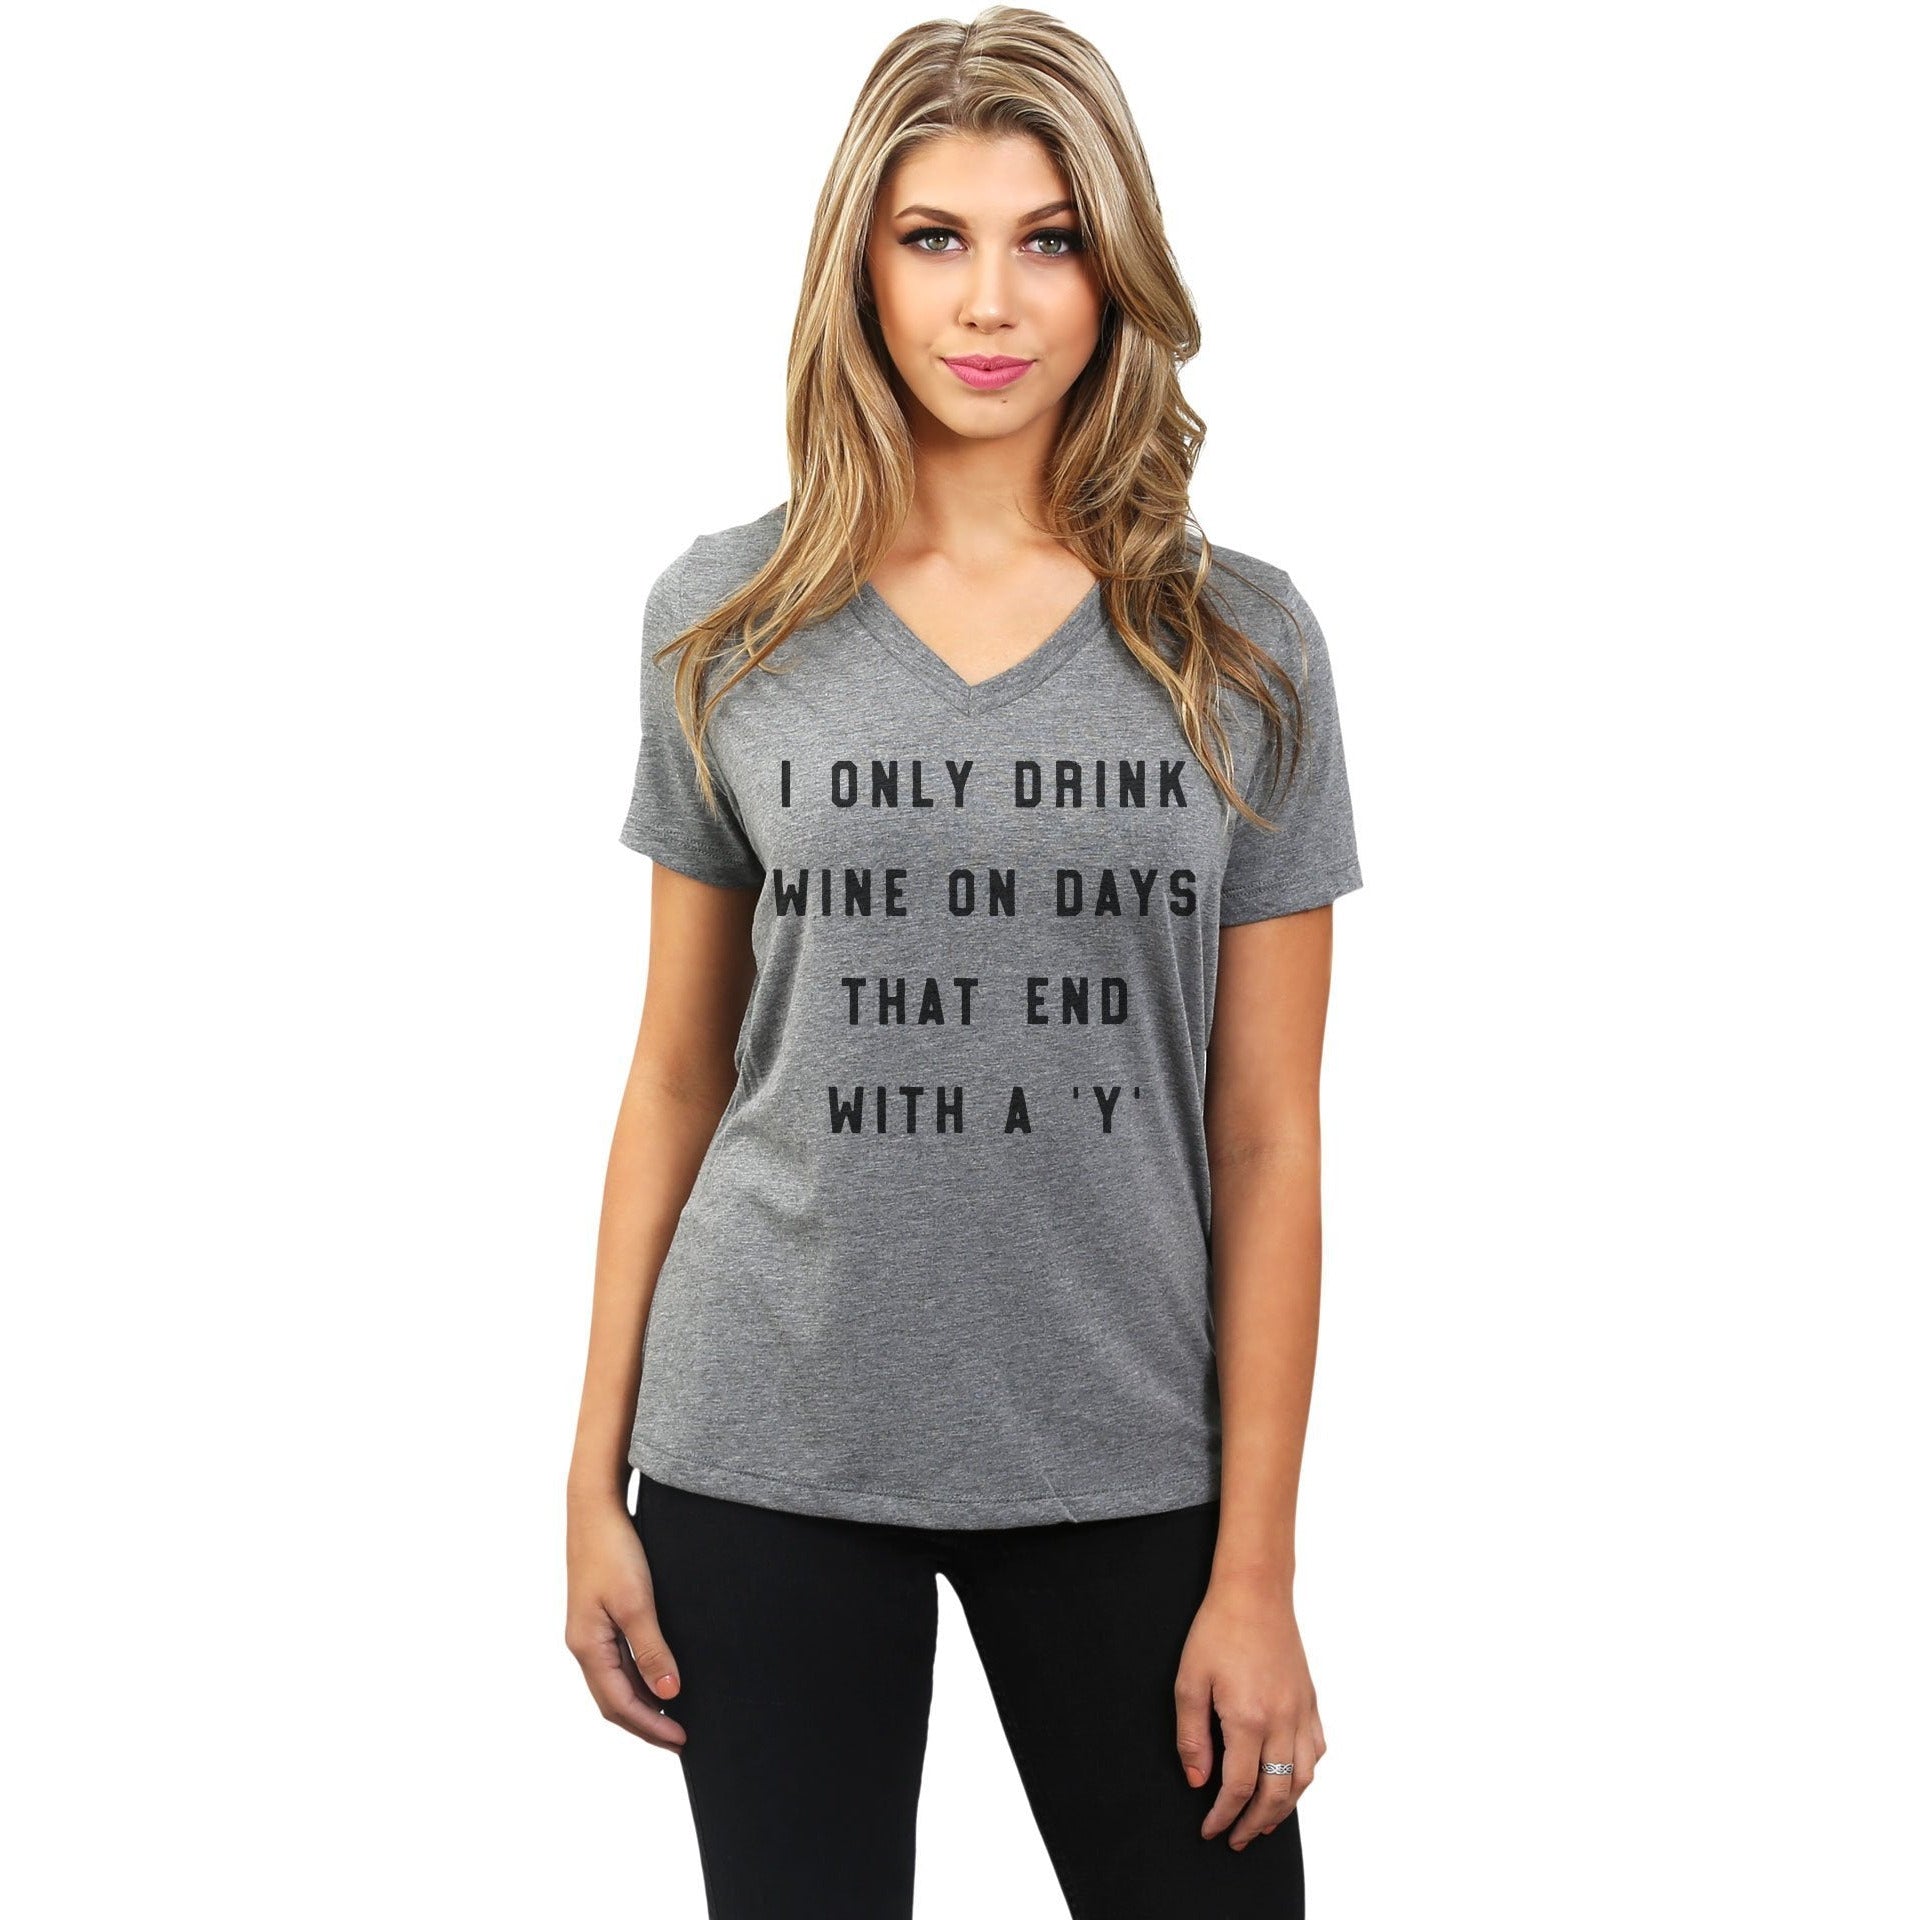 Drink Wine On Days Ends With Y Women's Relaxed Crewneck T-Shirt Top Tee Heather Grey Model